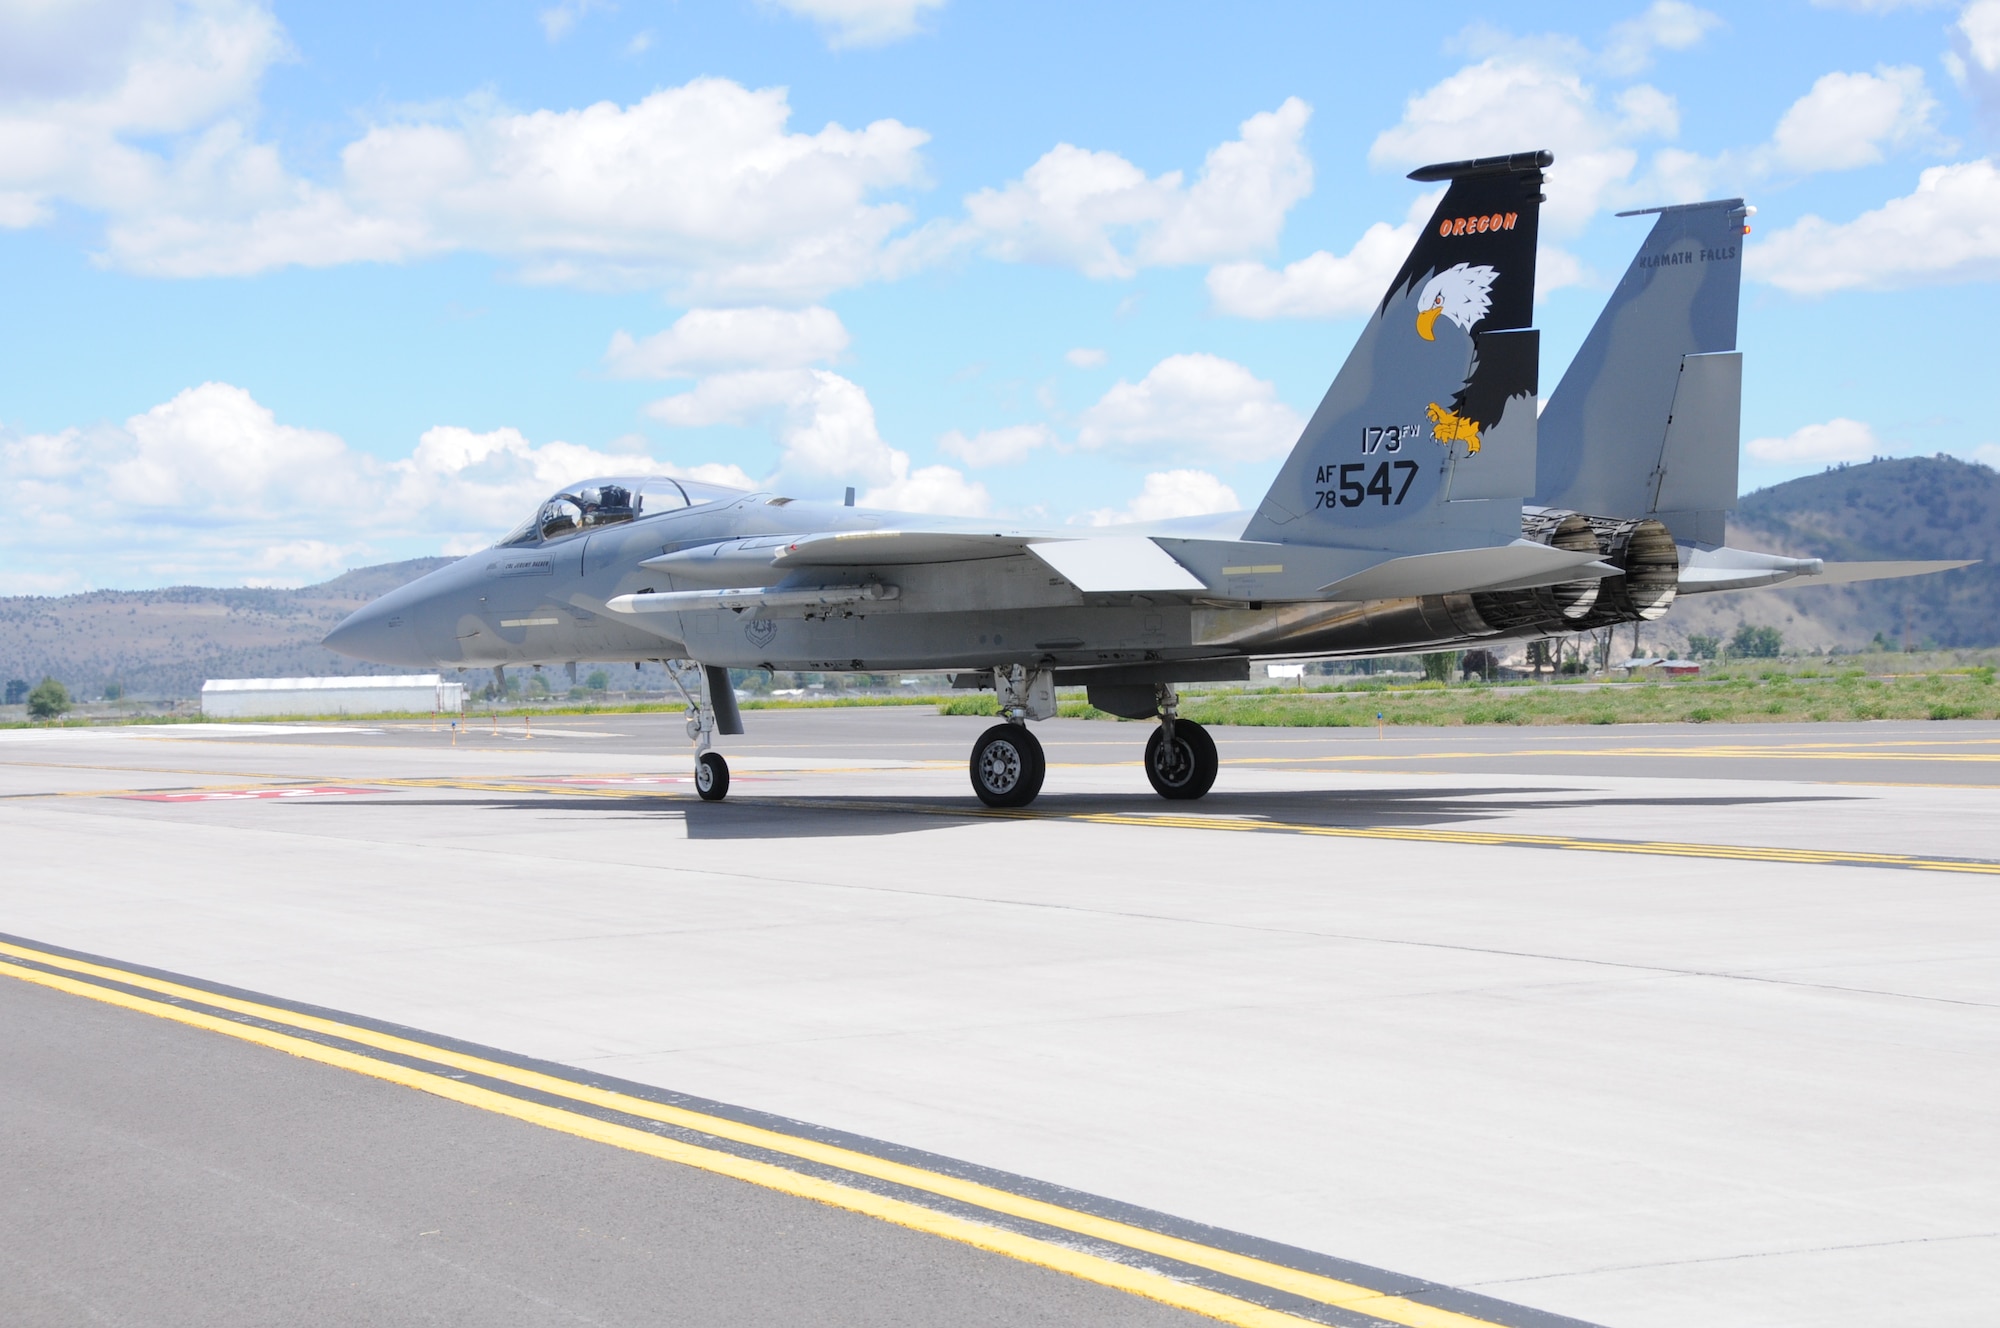 The 173rd Fighter Wing F-15 Eagle Command jet taxis to the runway in preparation for a training mission at Kingsley Field, Klamath Falls, Ore. May 28, 2014.  The 173rd Fighter Wing is the sole F-15C training base for the United States Air Force and is set to expand its mission this fall with the introduction of Active Duty personnel with a Total Force Initiative.  (U.S. Air National Guard photo by Master Sgt. Jennifer Shirar/Released)